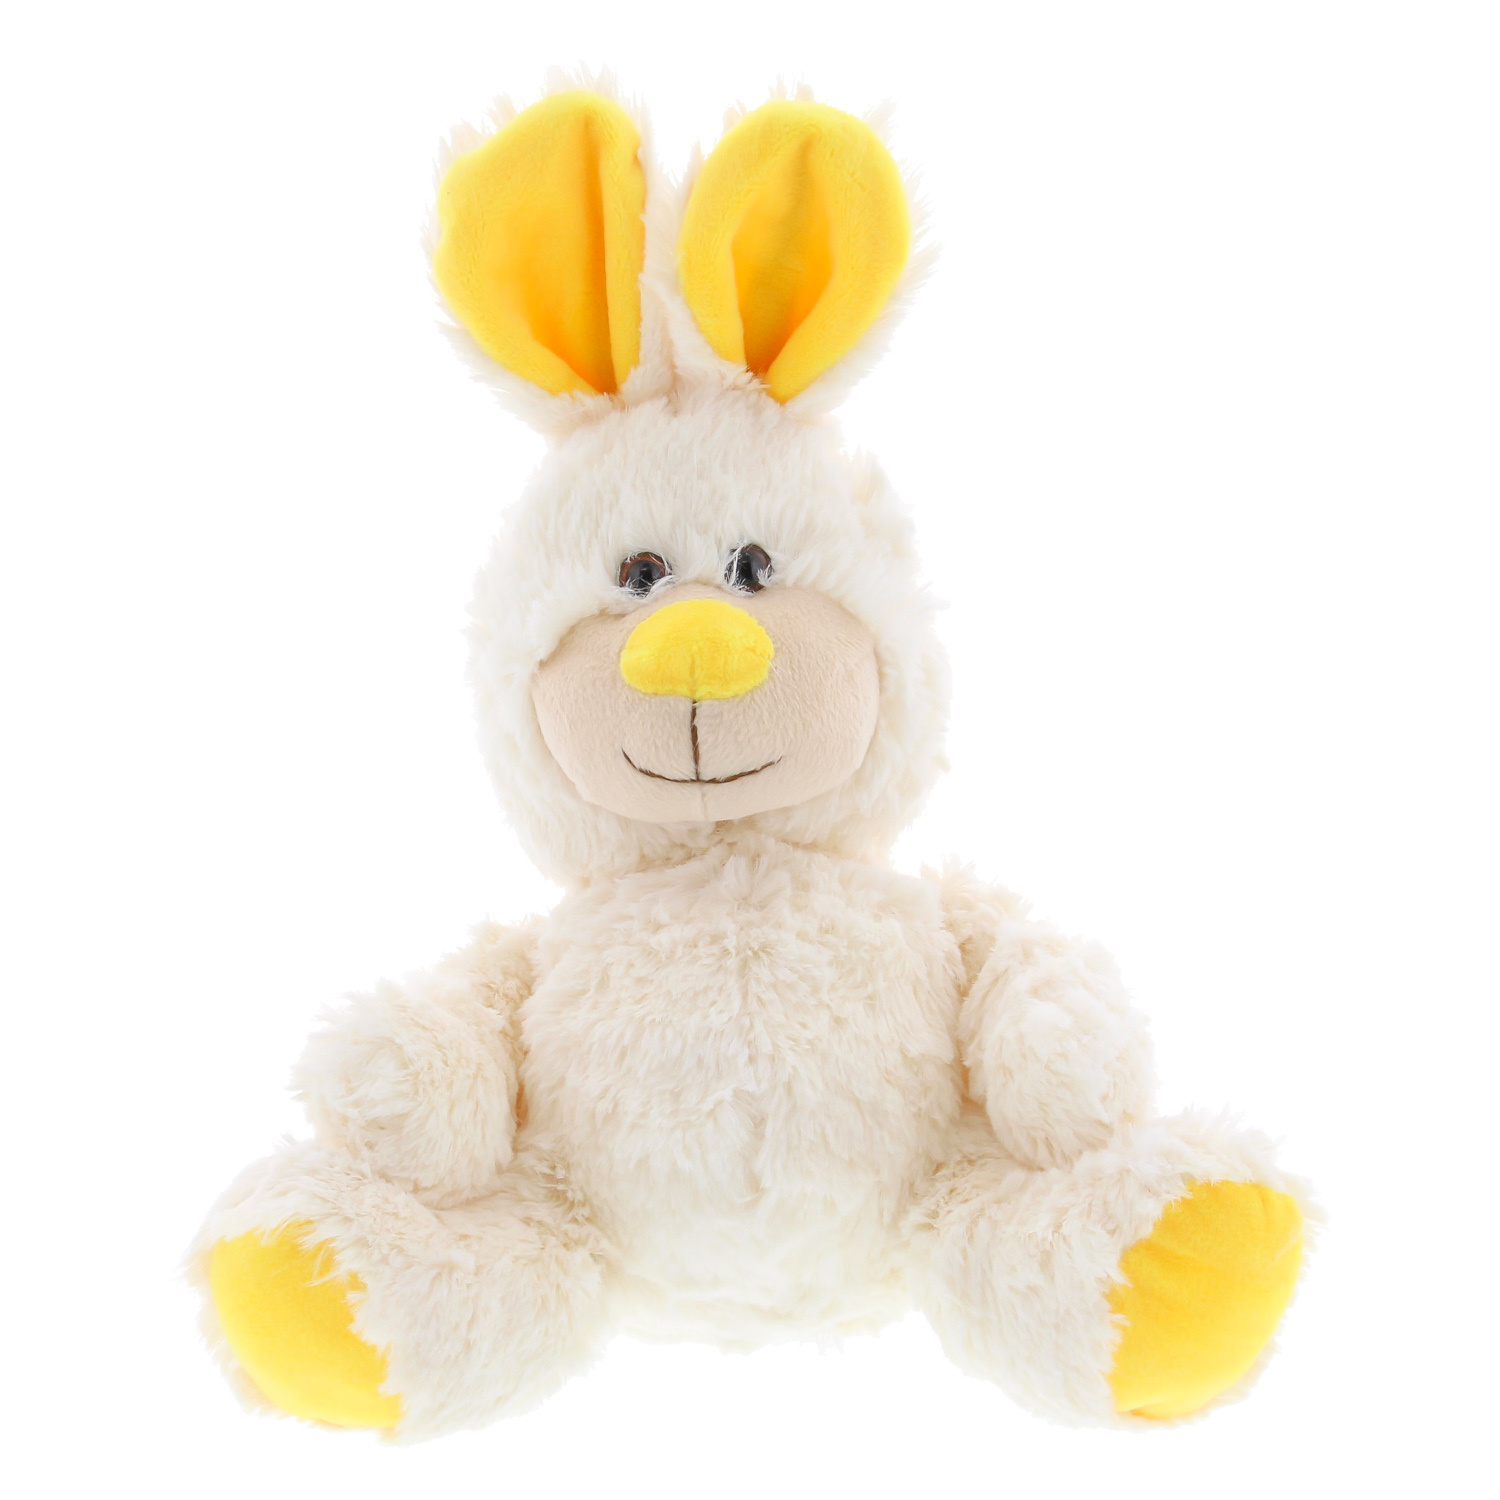 Rabbit "Jefke" with yellow nose - 200*180*270 mm - 2 pieces